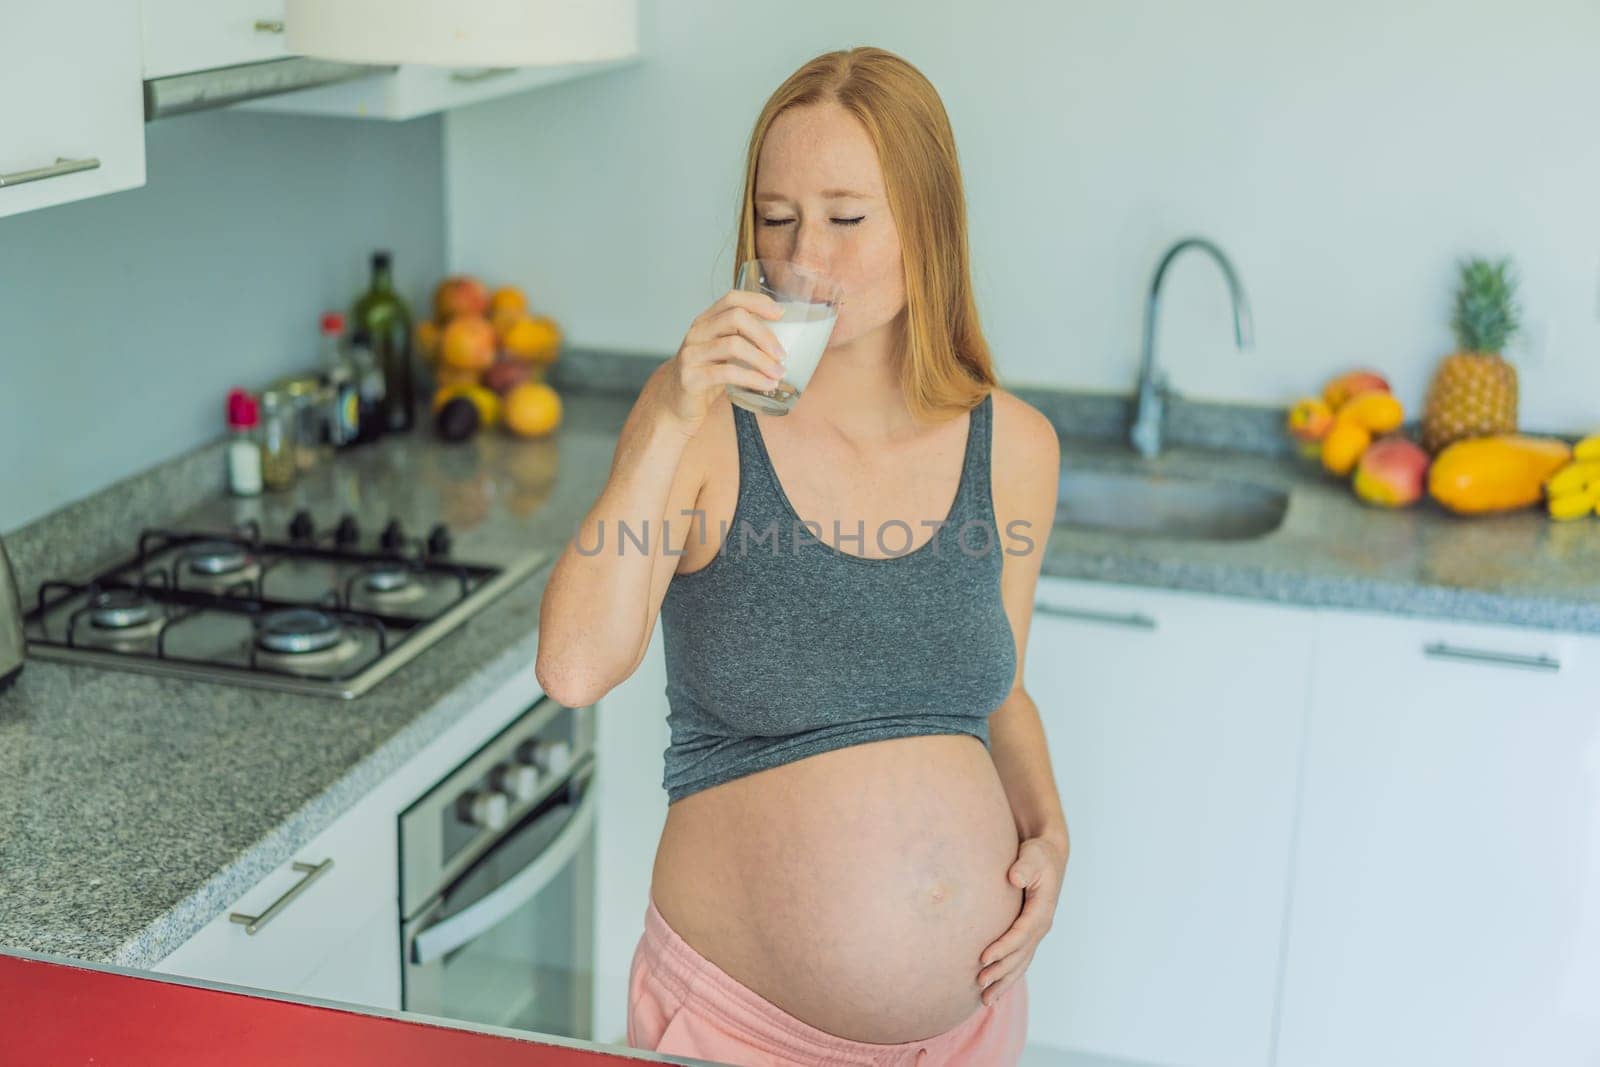 Weighing the pros and cons of milk during pregnancy, a thoughtful pregnant woman stands in the kitchen with a glass, contemplating the decision to include or avoid milk for her and her baby's well-being.